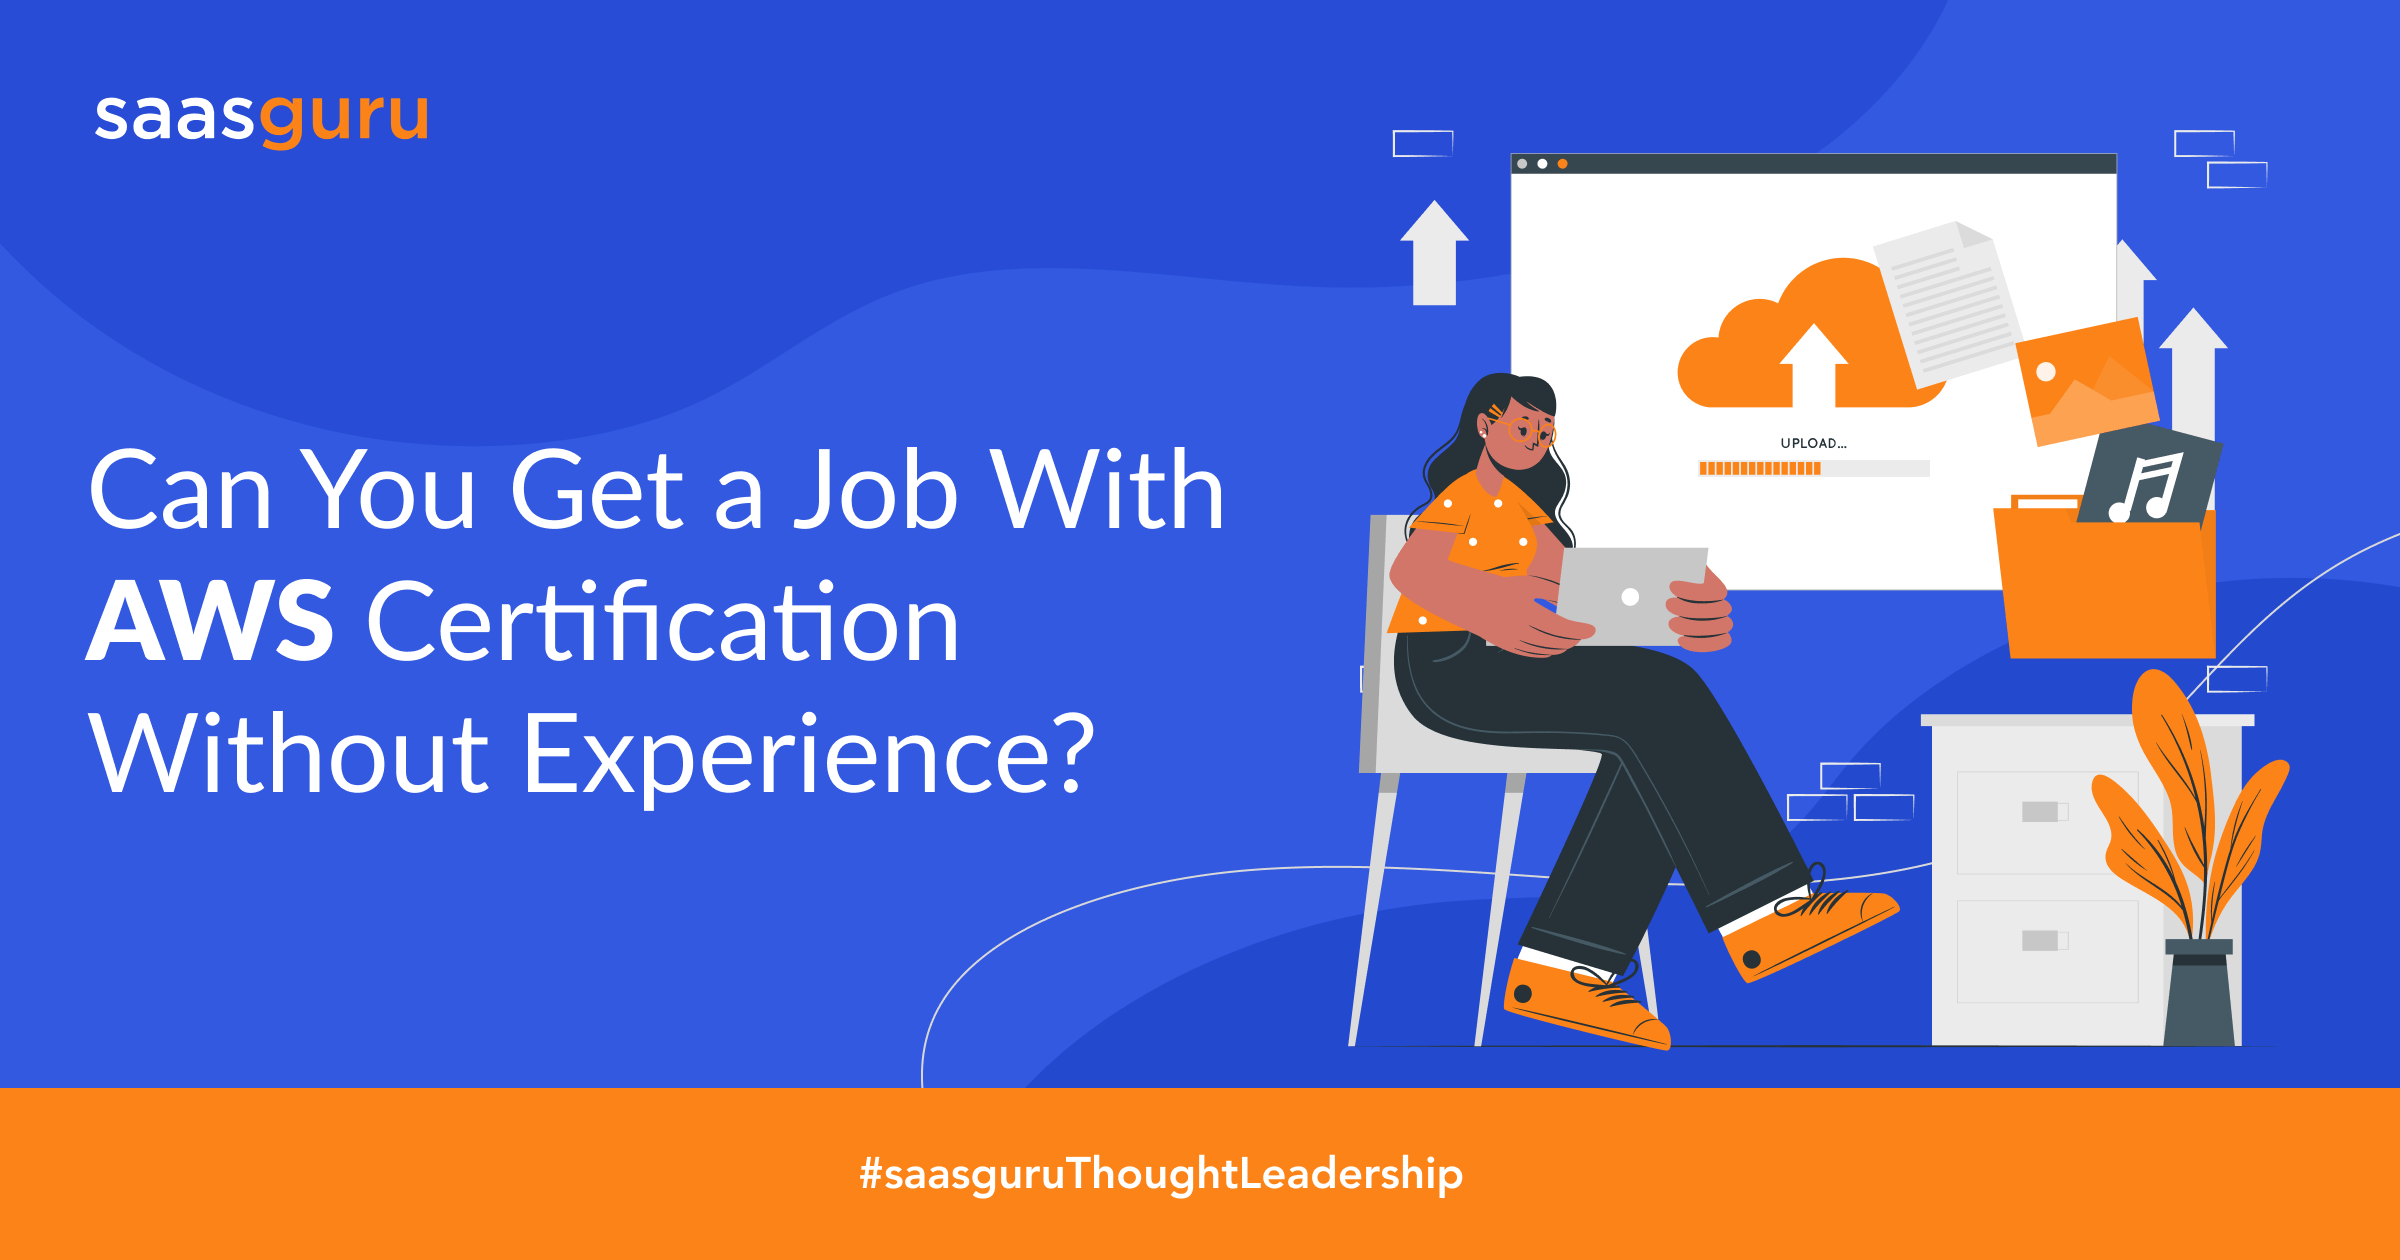 Can You Get a Job With AWS Certification Without Experience